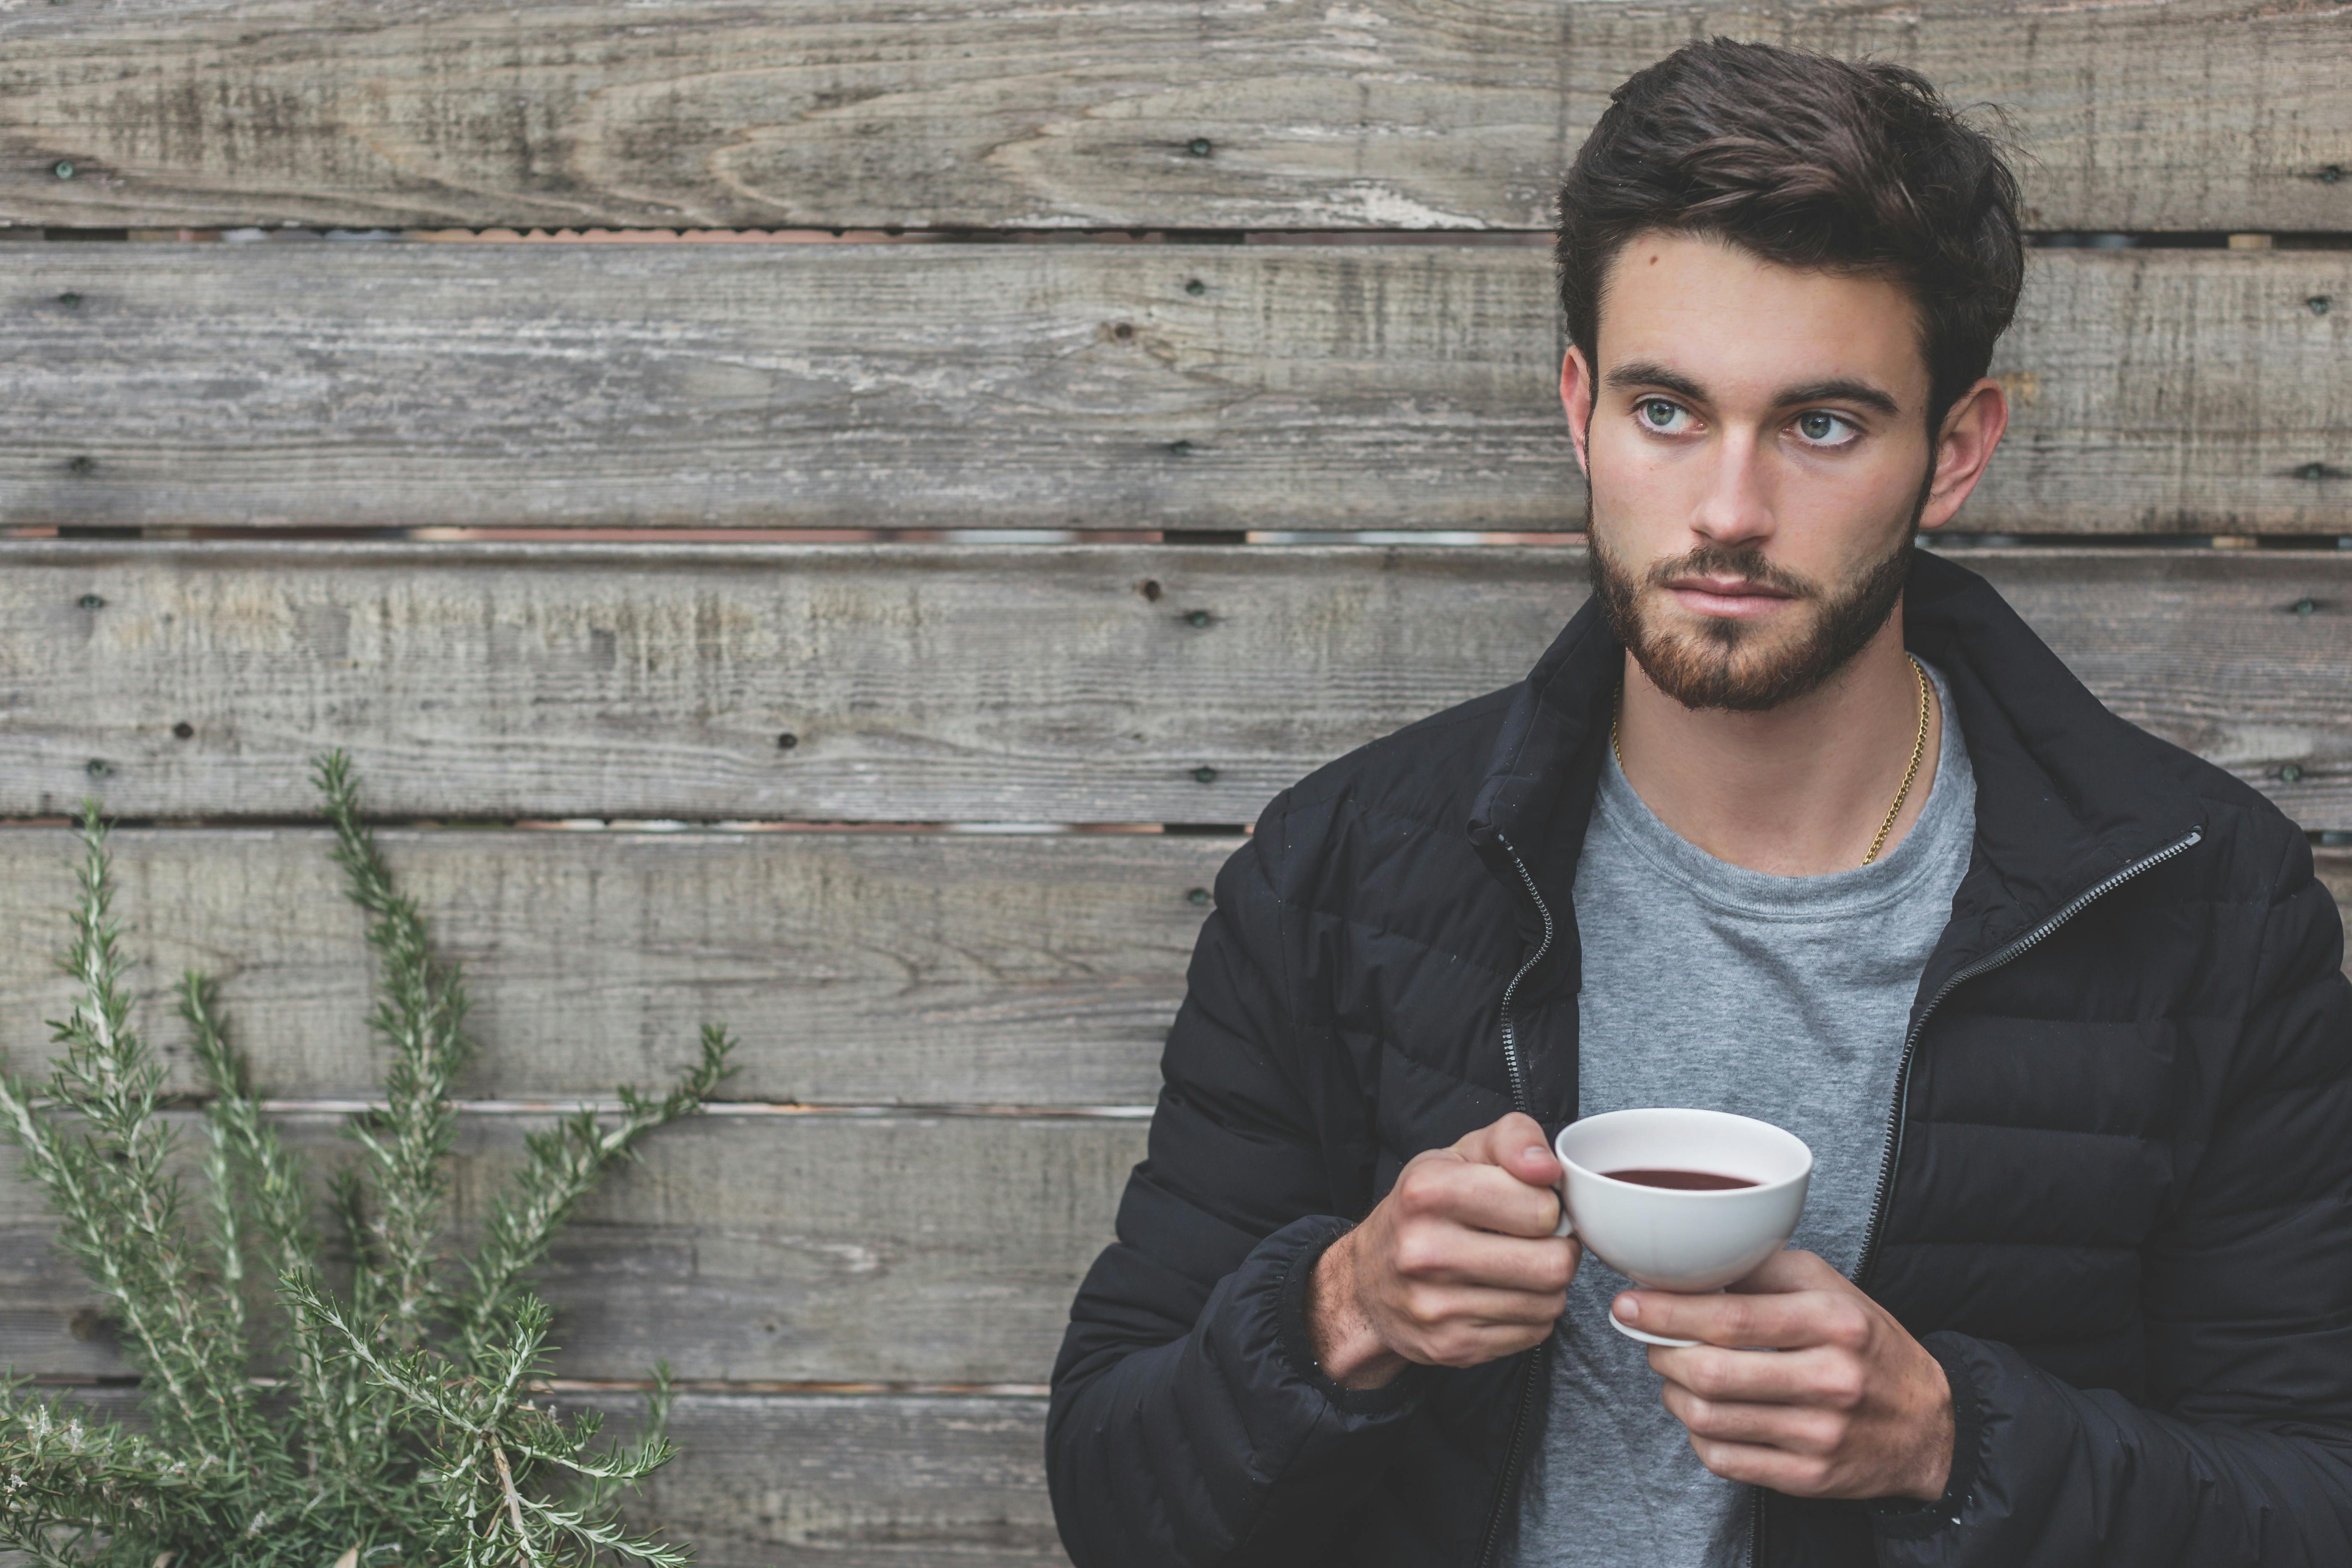 Man holding a cup of coffee. | Photo: Pexels